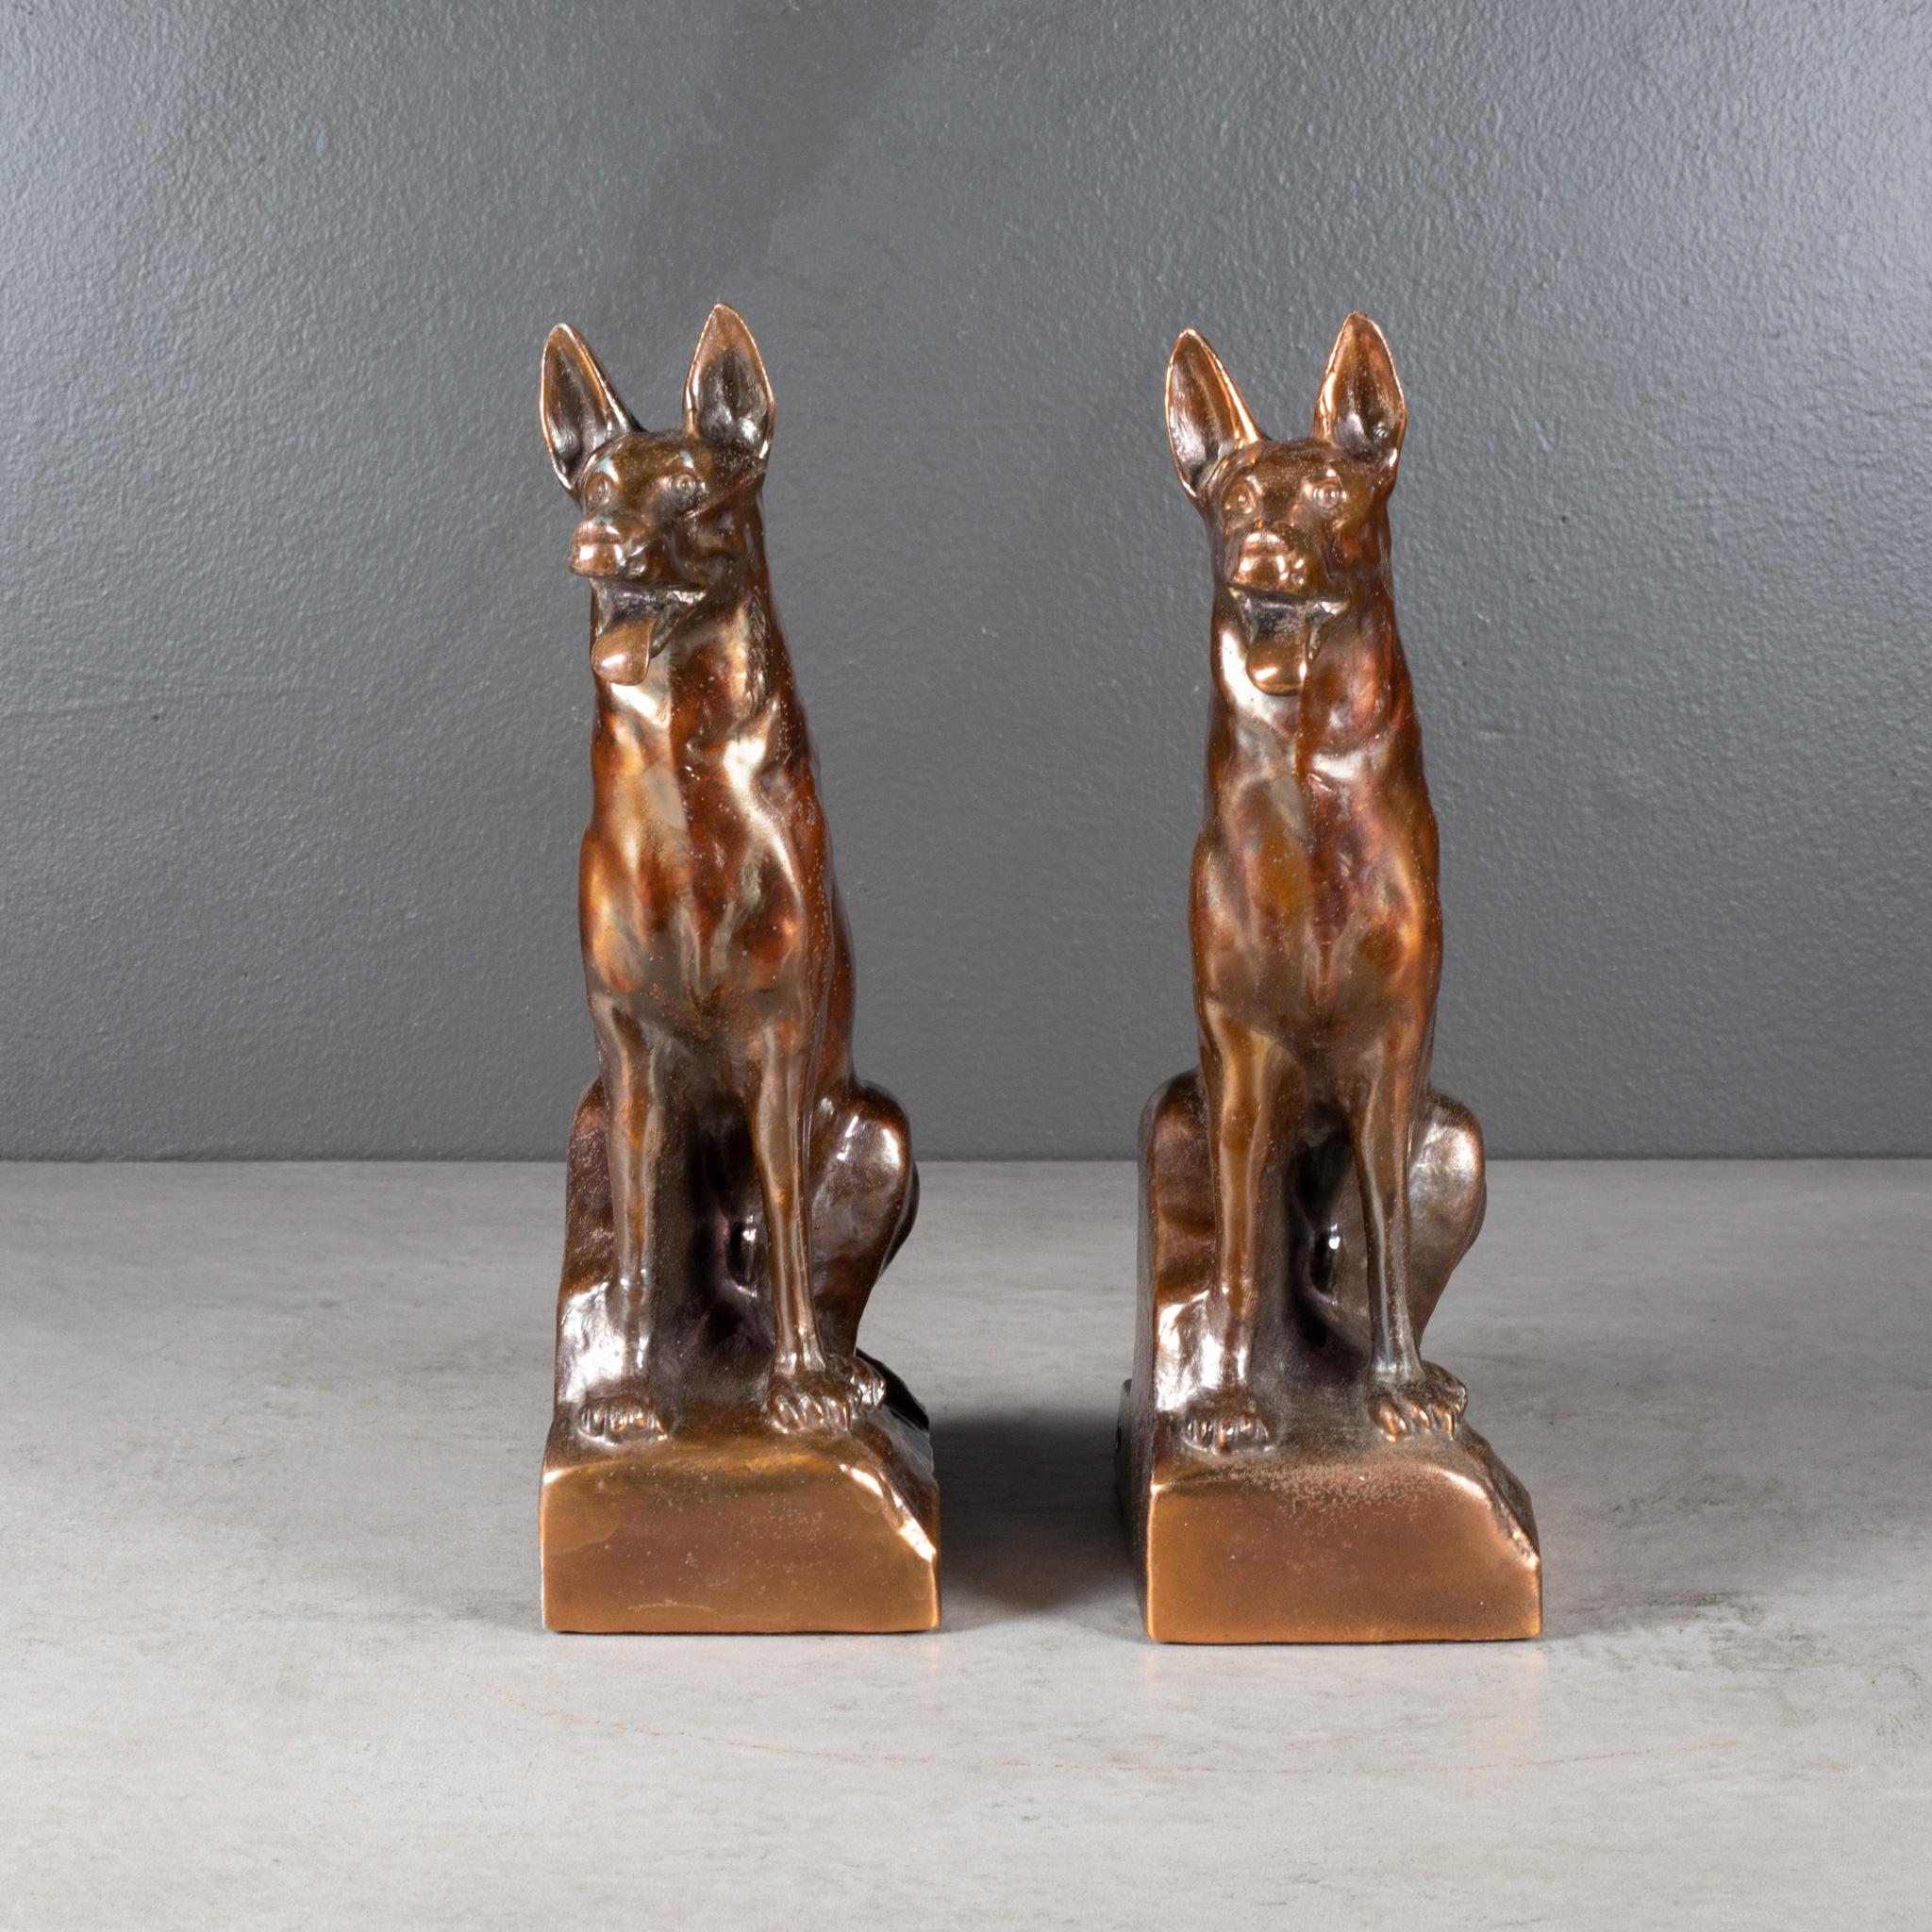 ABOUT

A pair of large bronze plated German Shepherd bookends with original felt on the bottom. Both stamped 